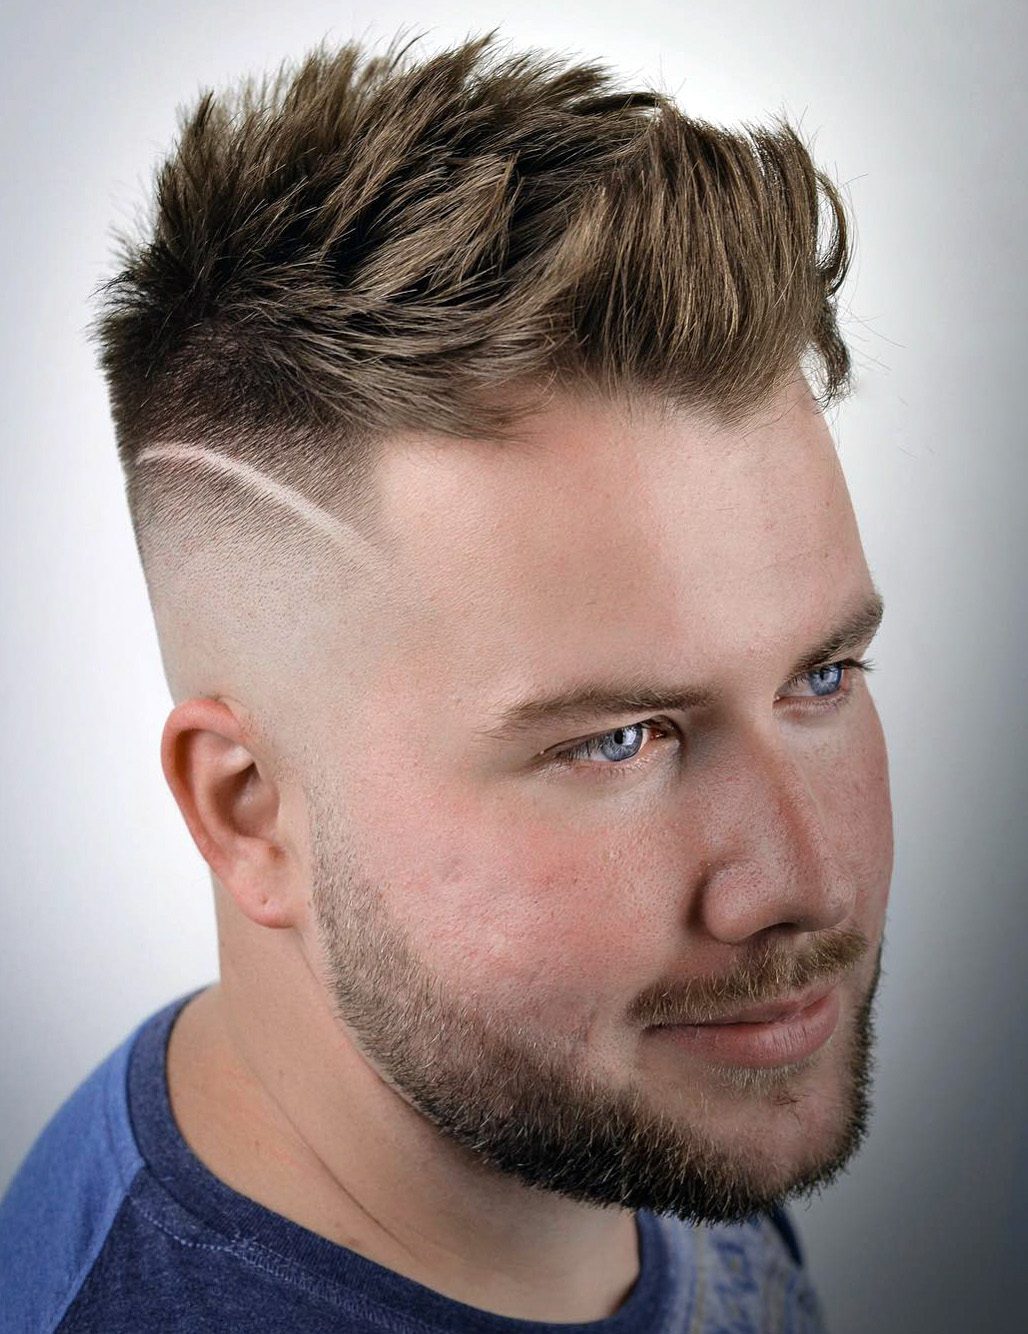 50 Haircuts for Guys With Round Faces | Haircut Inspiration